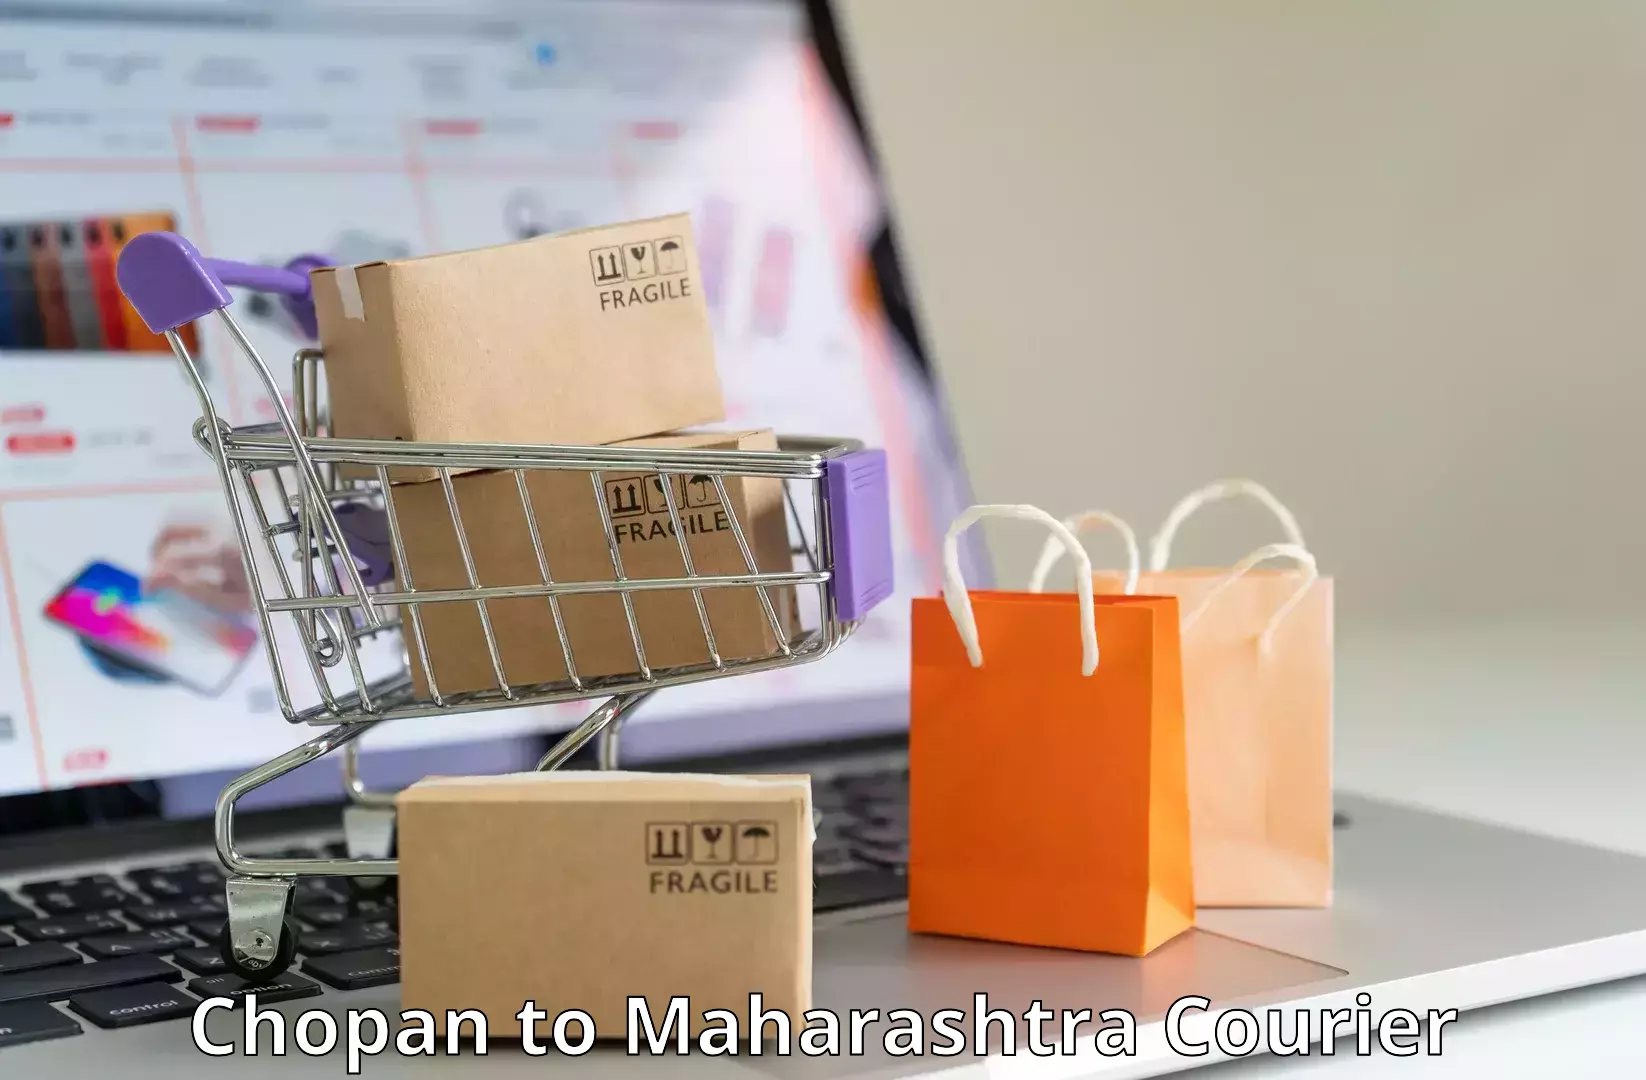 Courier service booking Chopan to Chembur